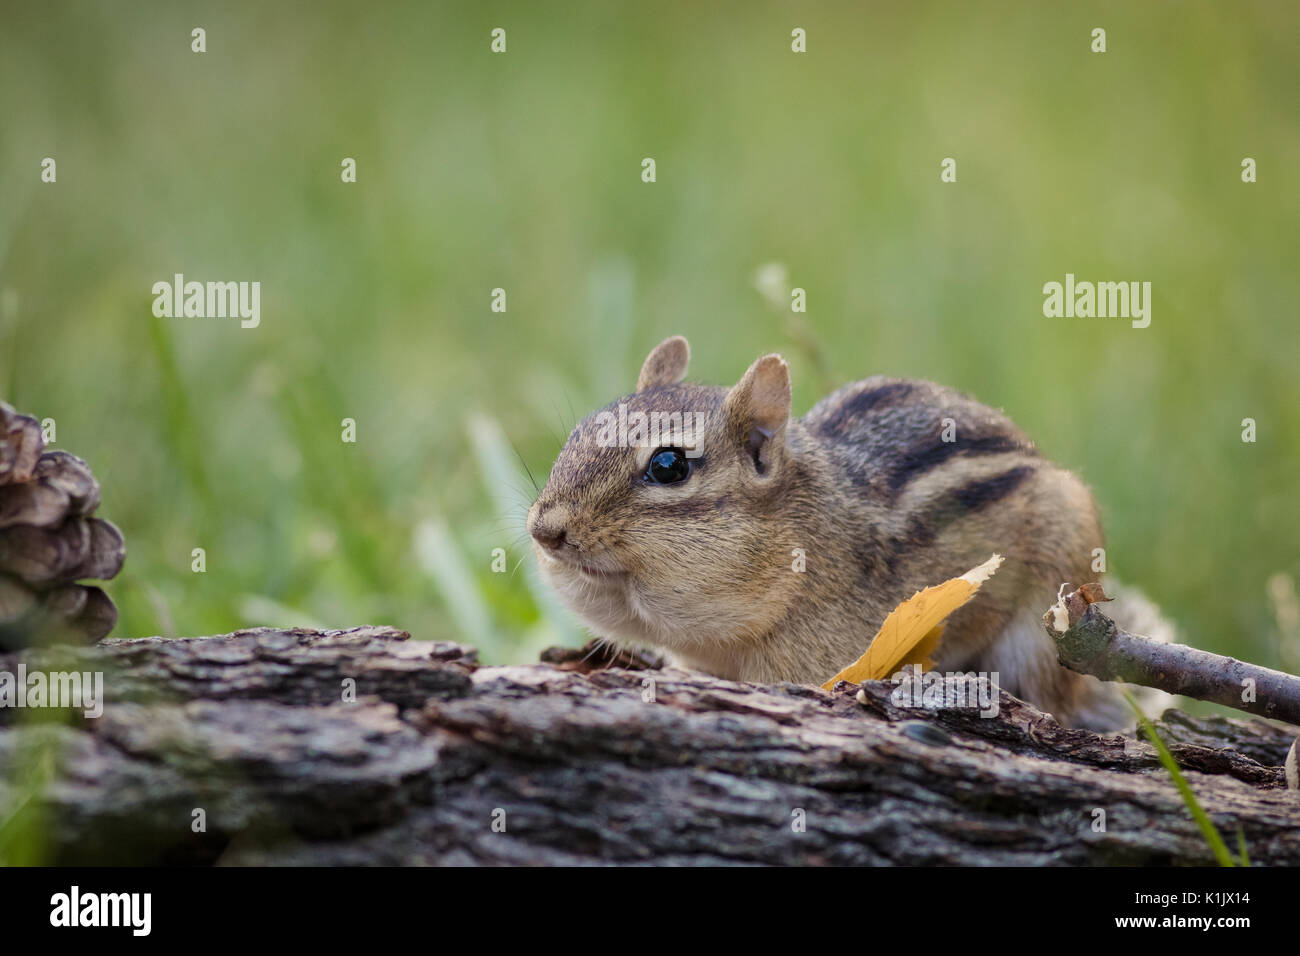 Adorable Eastern Chipmunk (Tamias Striatus) stuffs cheeks with nuts and seeds for fall season Stock Photo